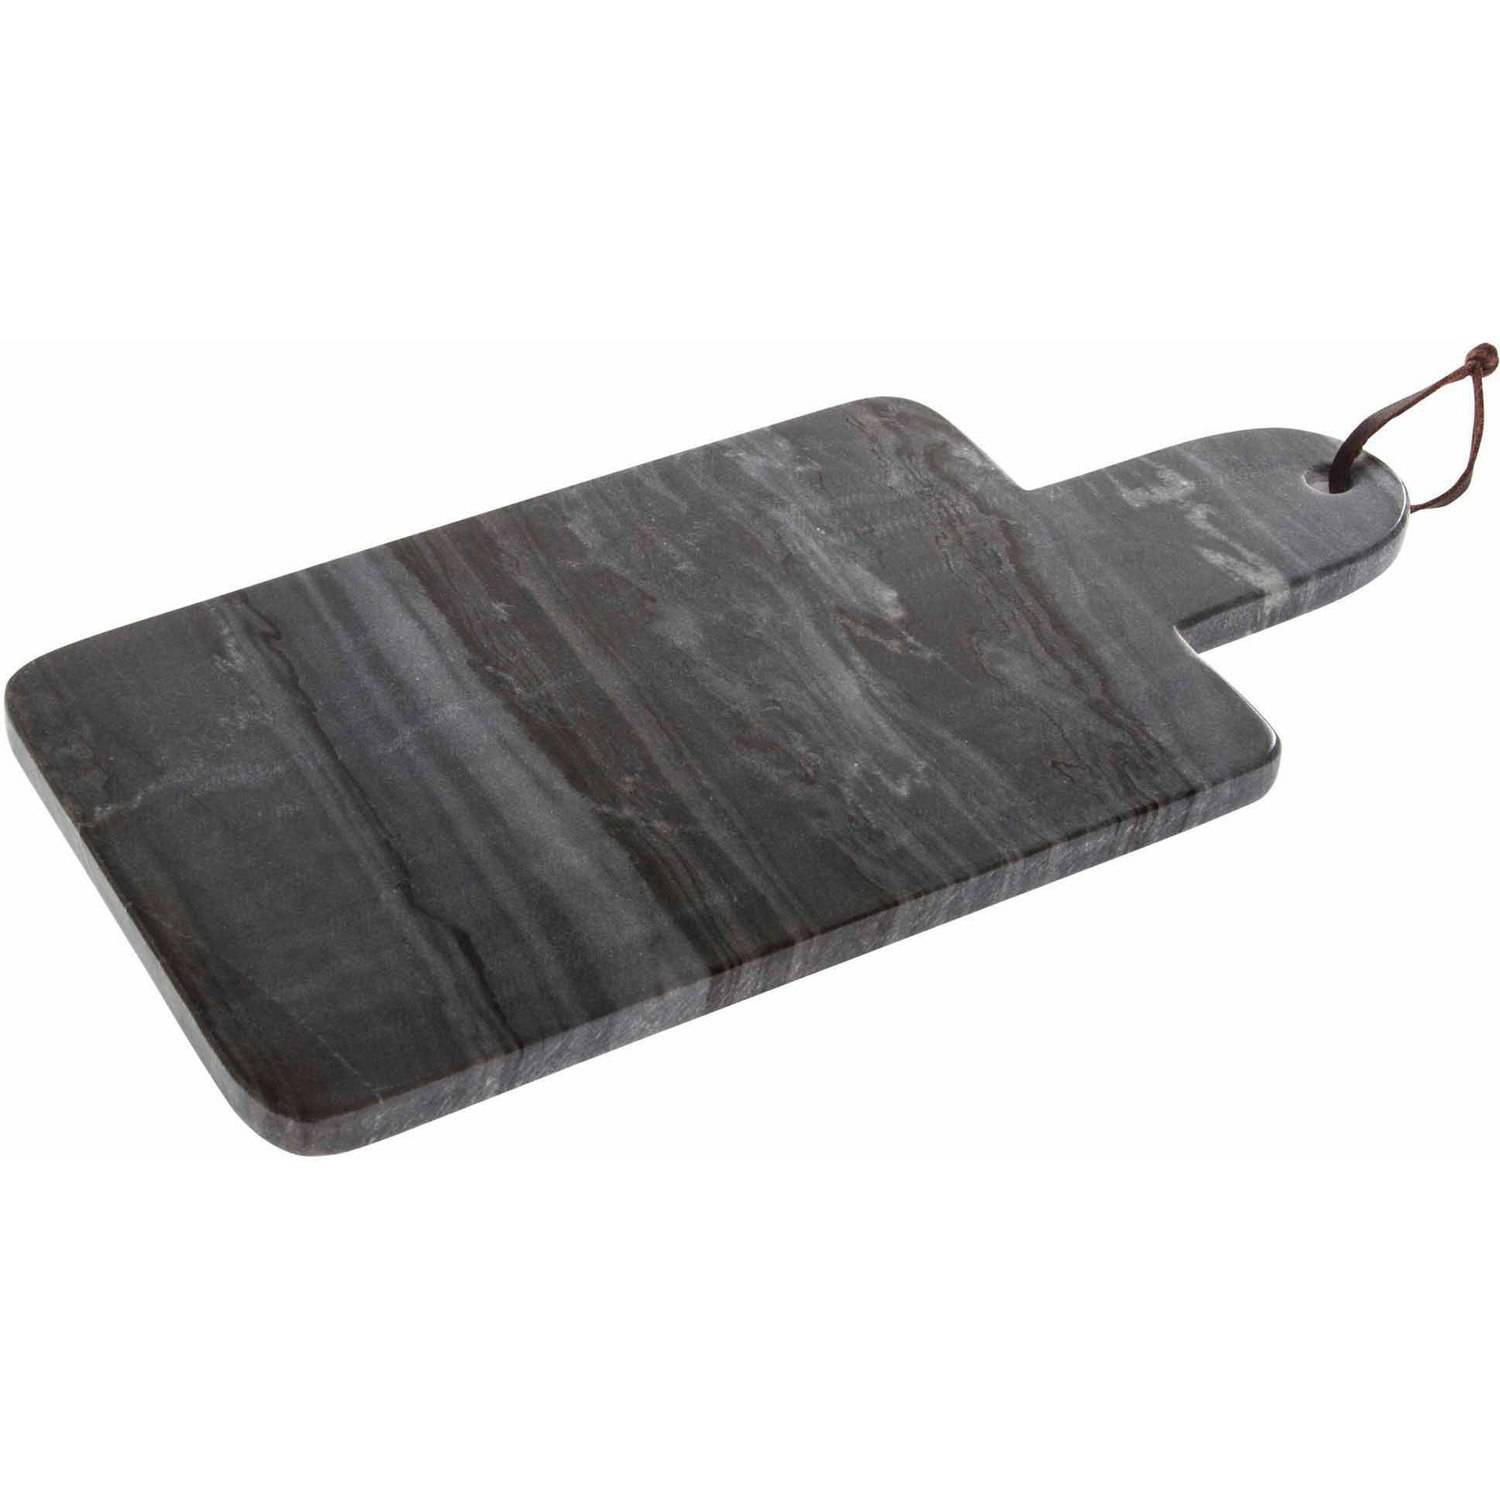 Thirstystone Small Grey Marble Paddle Cheese Board, 12" X 6.25" - image 1 of 1